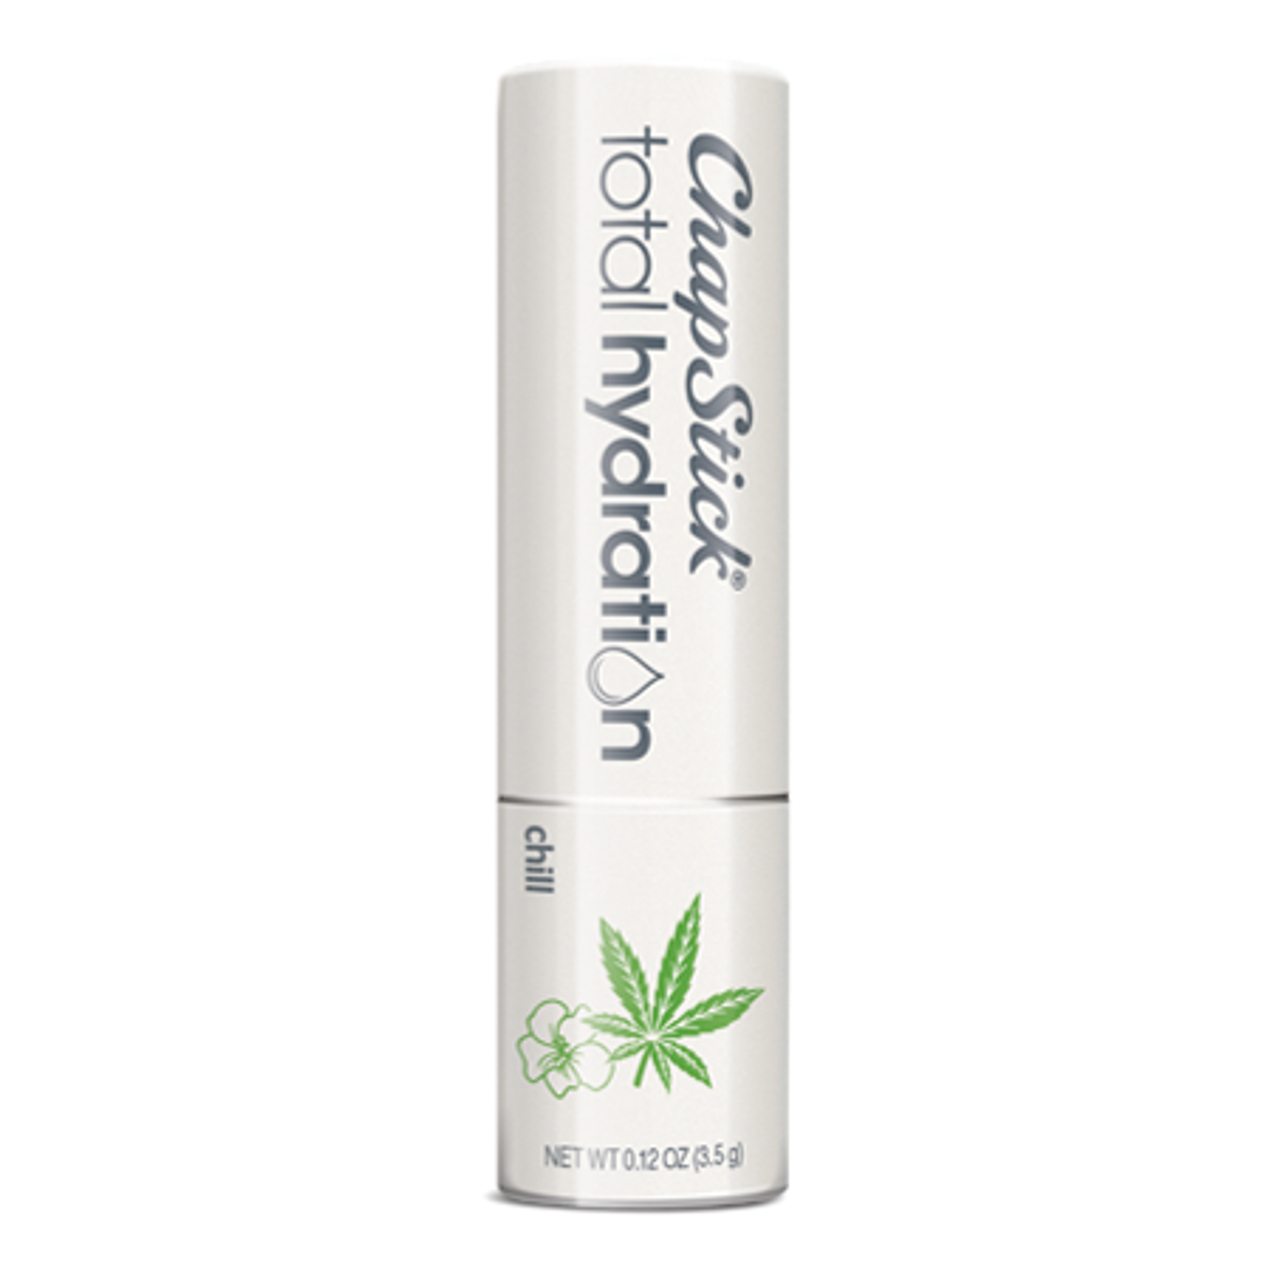 Chill  Total Hydration Essential Oils Lip Balm from ChapStick®